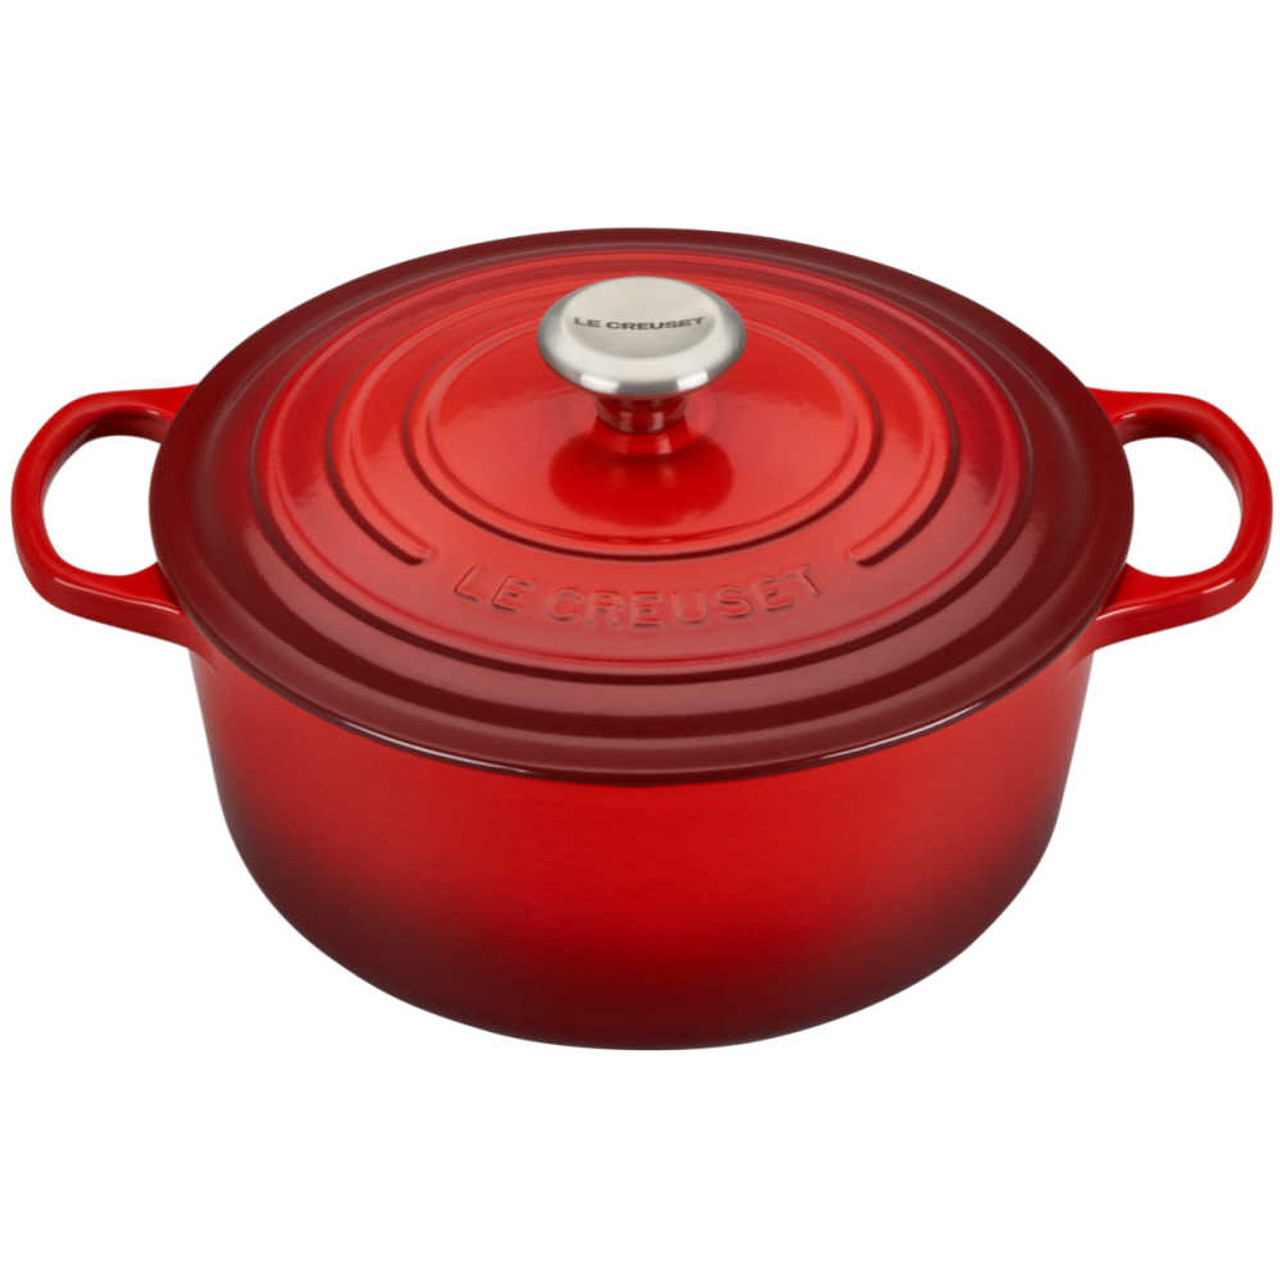 https://cdn11.bigcommerce.com/s-hccytny0od/images/stencil/1280x1280/products/3673/17596/Le_Creuset_Round_Dutch_Oven_Cerise__38190.1639879418.jpg?c=2?imbypass=on